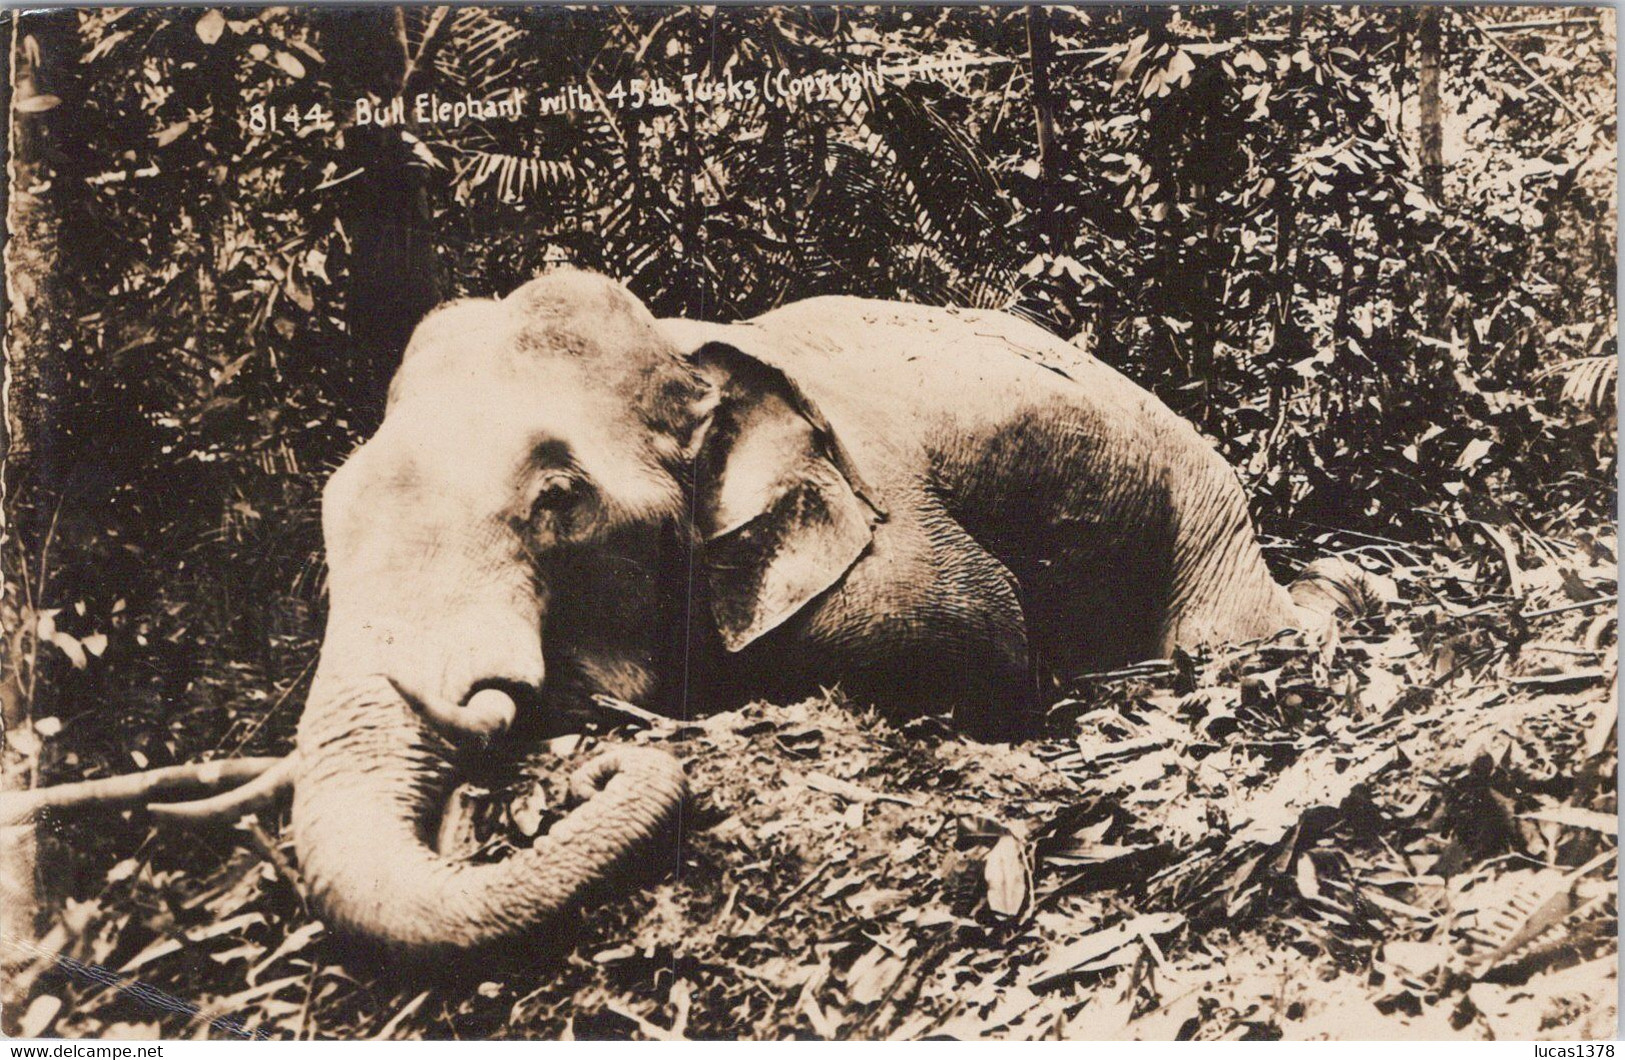 MALAYSIE / MALAISIE / HUNTING /  CHASSE A L'ELEPHANT / BULL ELEPHANT WITH 45 TUSKS / L. R. HUBBACK / RARE CARTE PHOTO - Malaysia